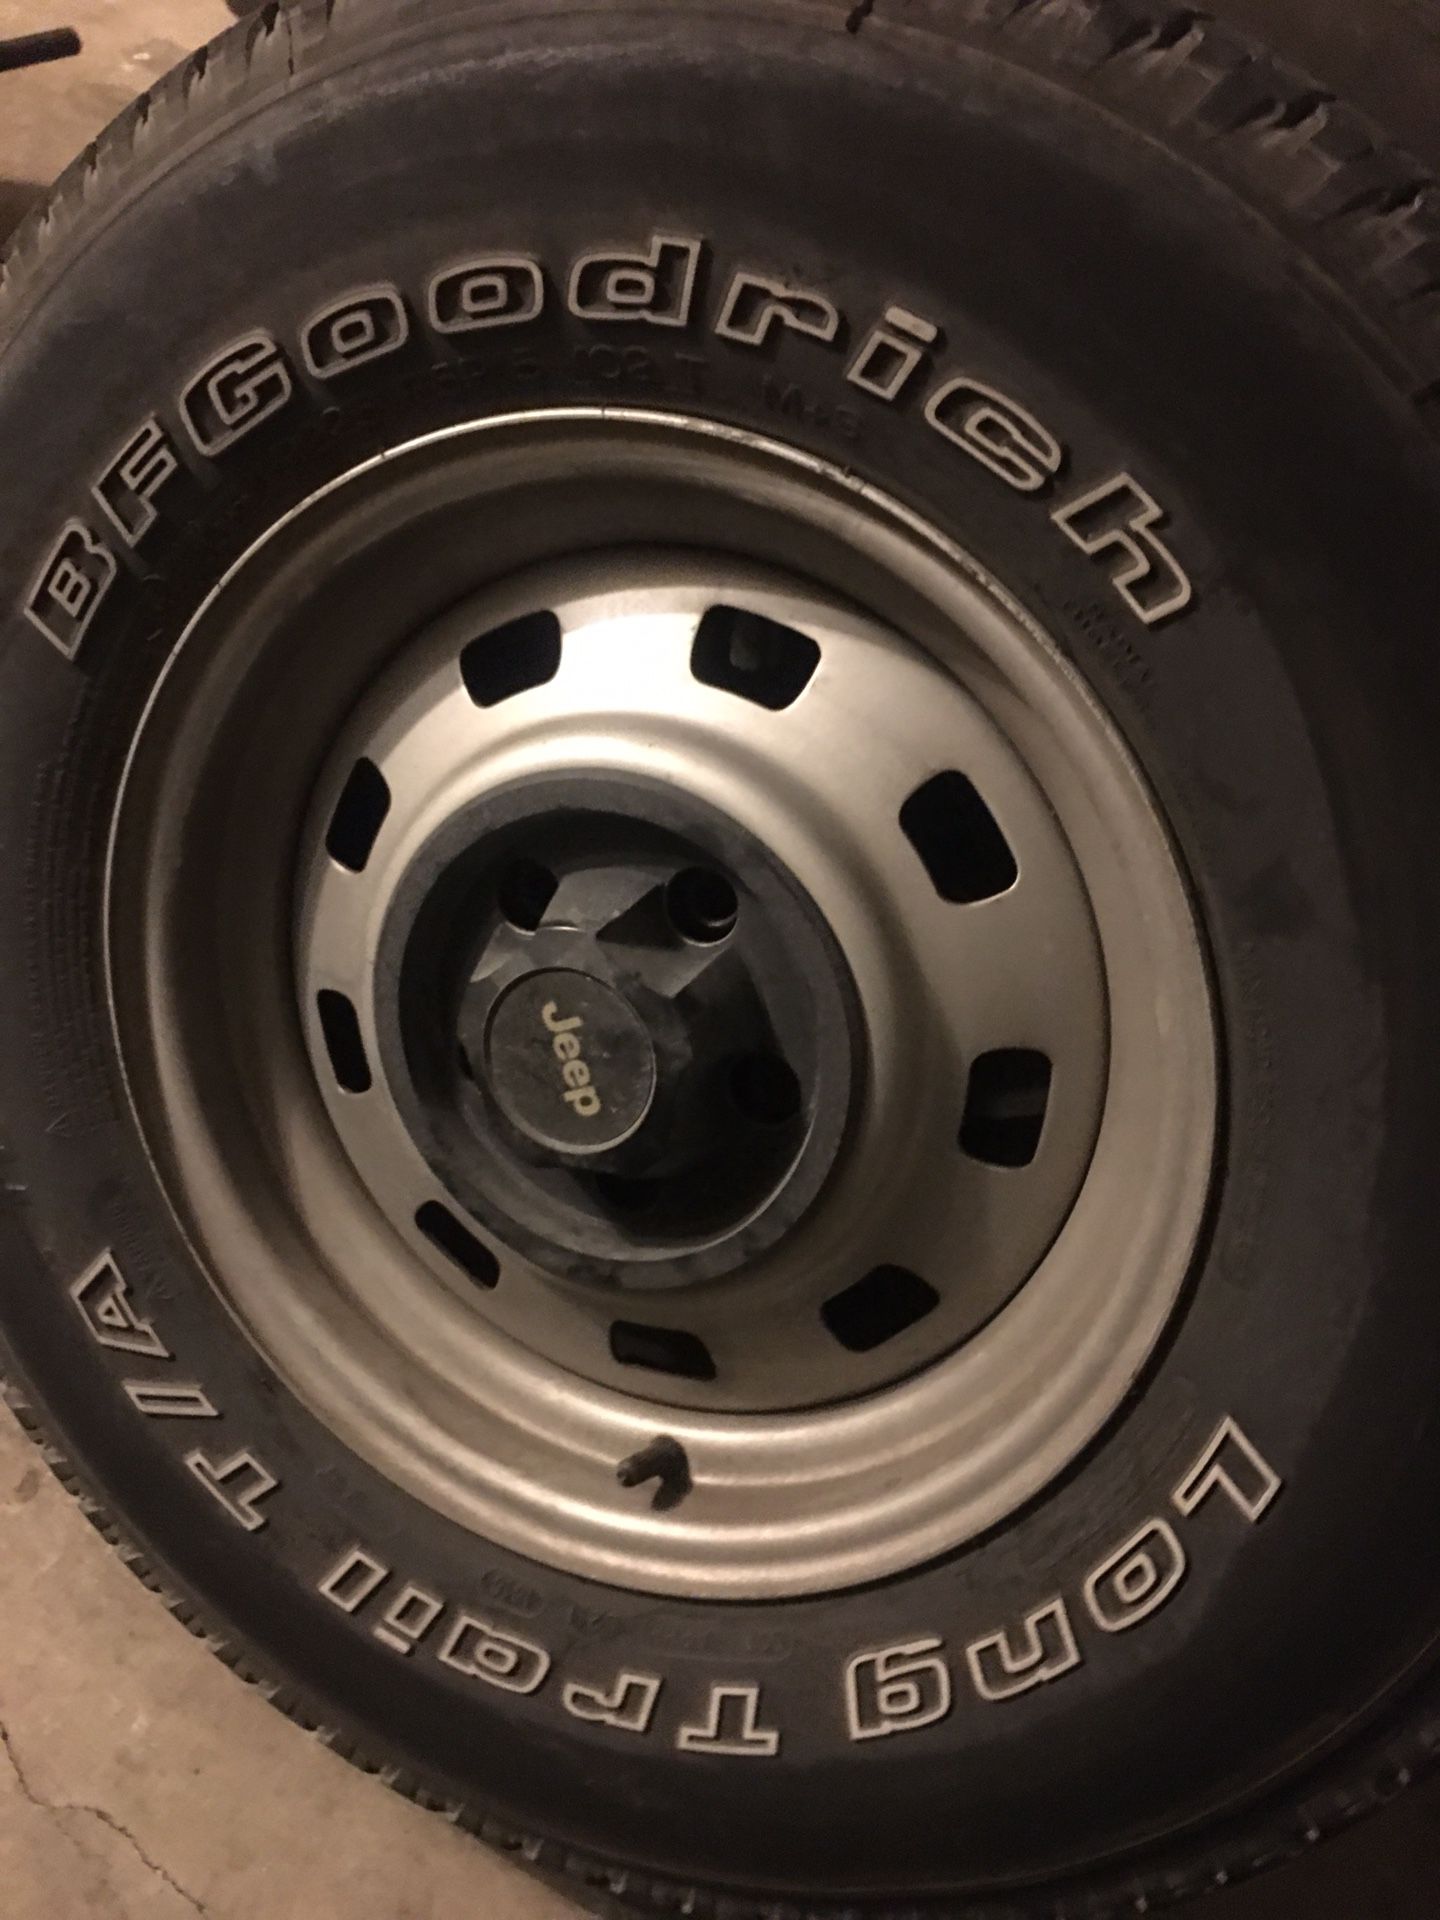 225/75R15 BFGoodrich long trail T/A set of jeep rims and tires